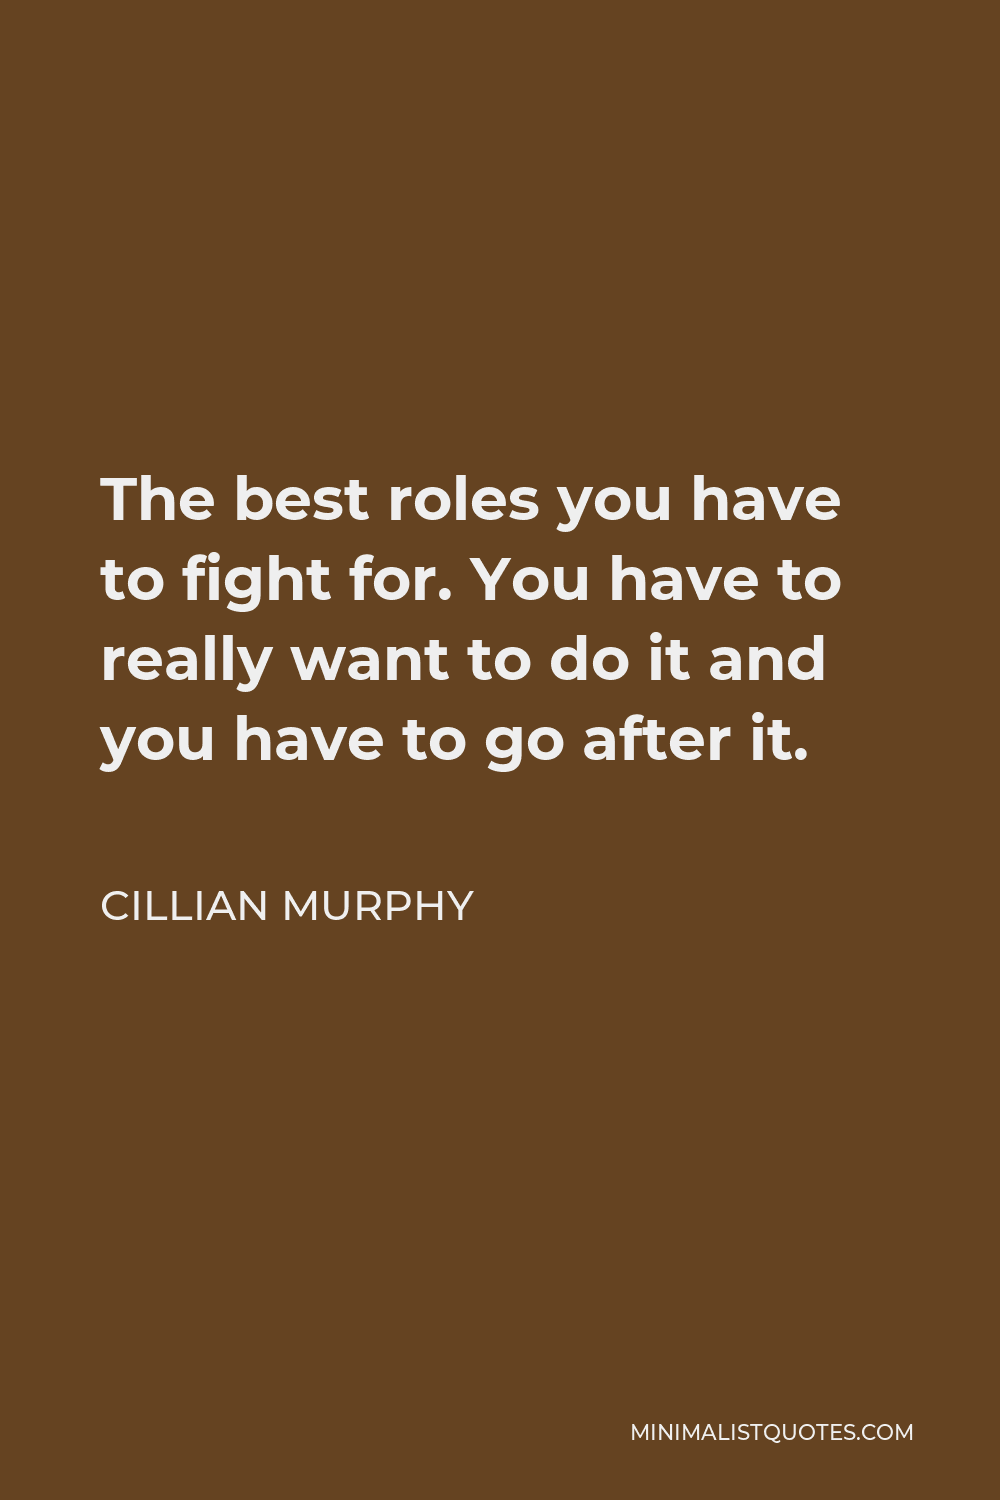 Cillian Murphy Quote - The best roles you have to fight for. You have to really want to do it and you have to go after it.